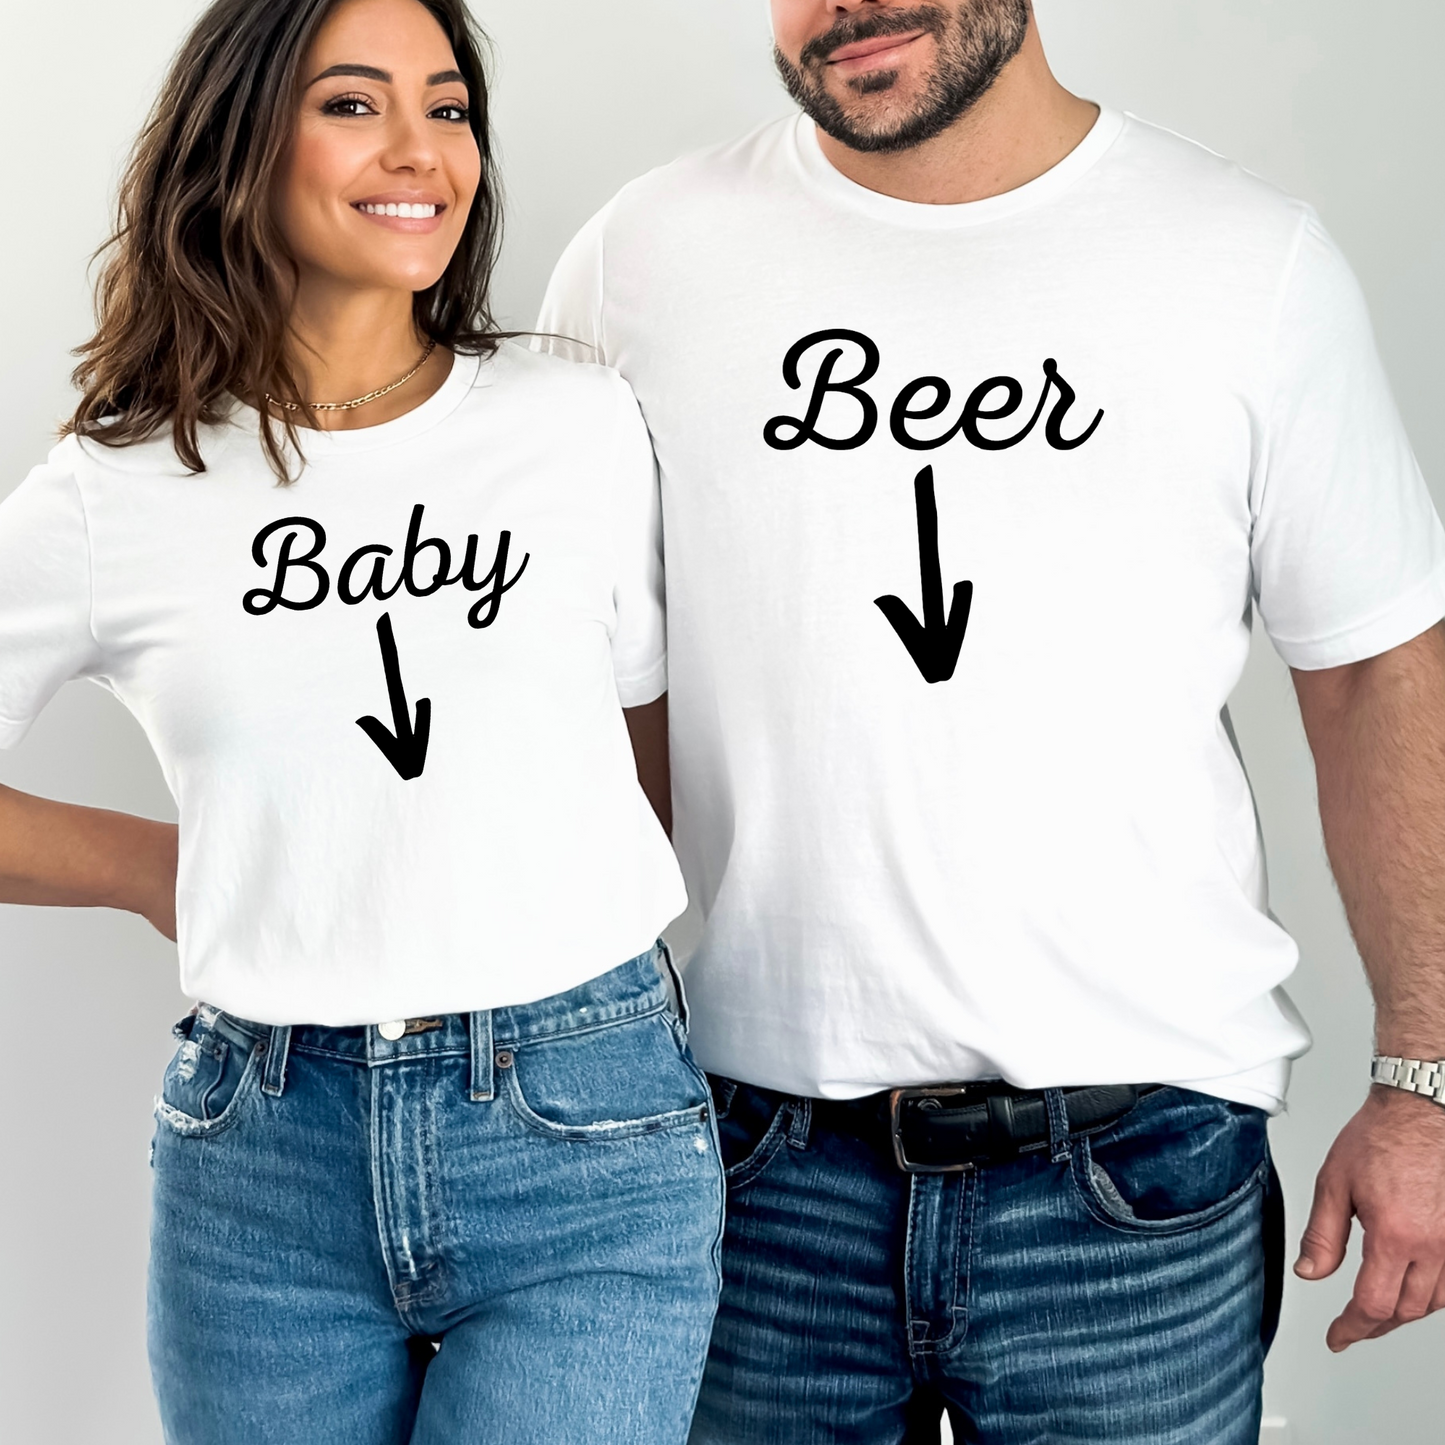 Funny Pregnancy Couple T-shirts - Beer Belly and Baby Belly